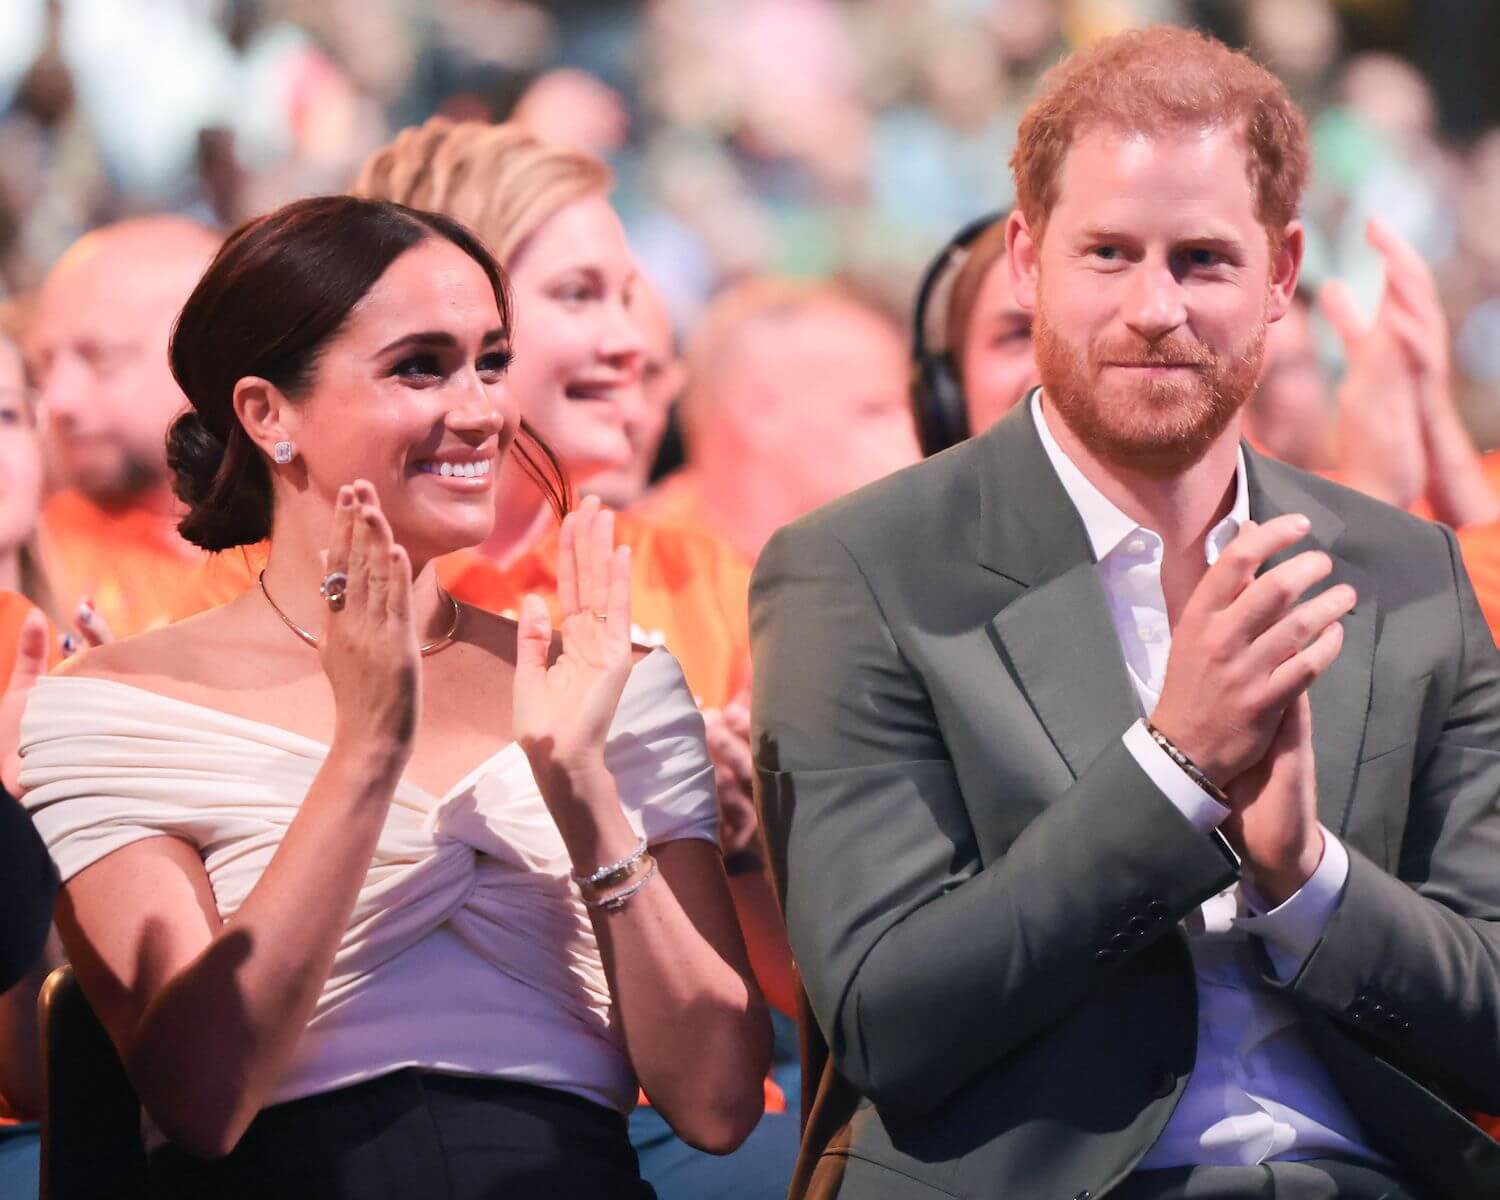 Meghan Markle wears a white off the shoulder top while sitting next to Prince Harry as both smile and clap their hands